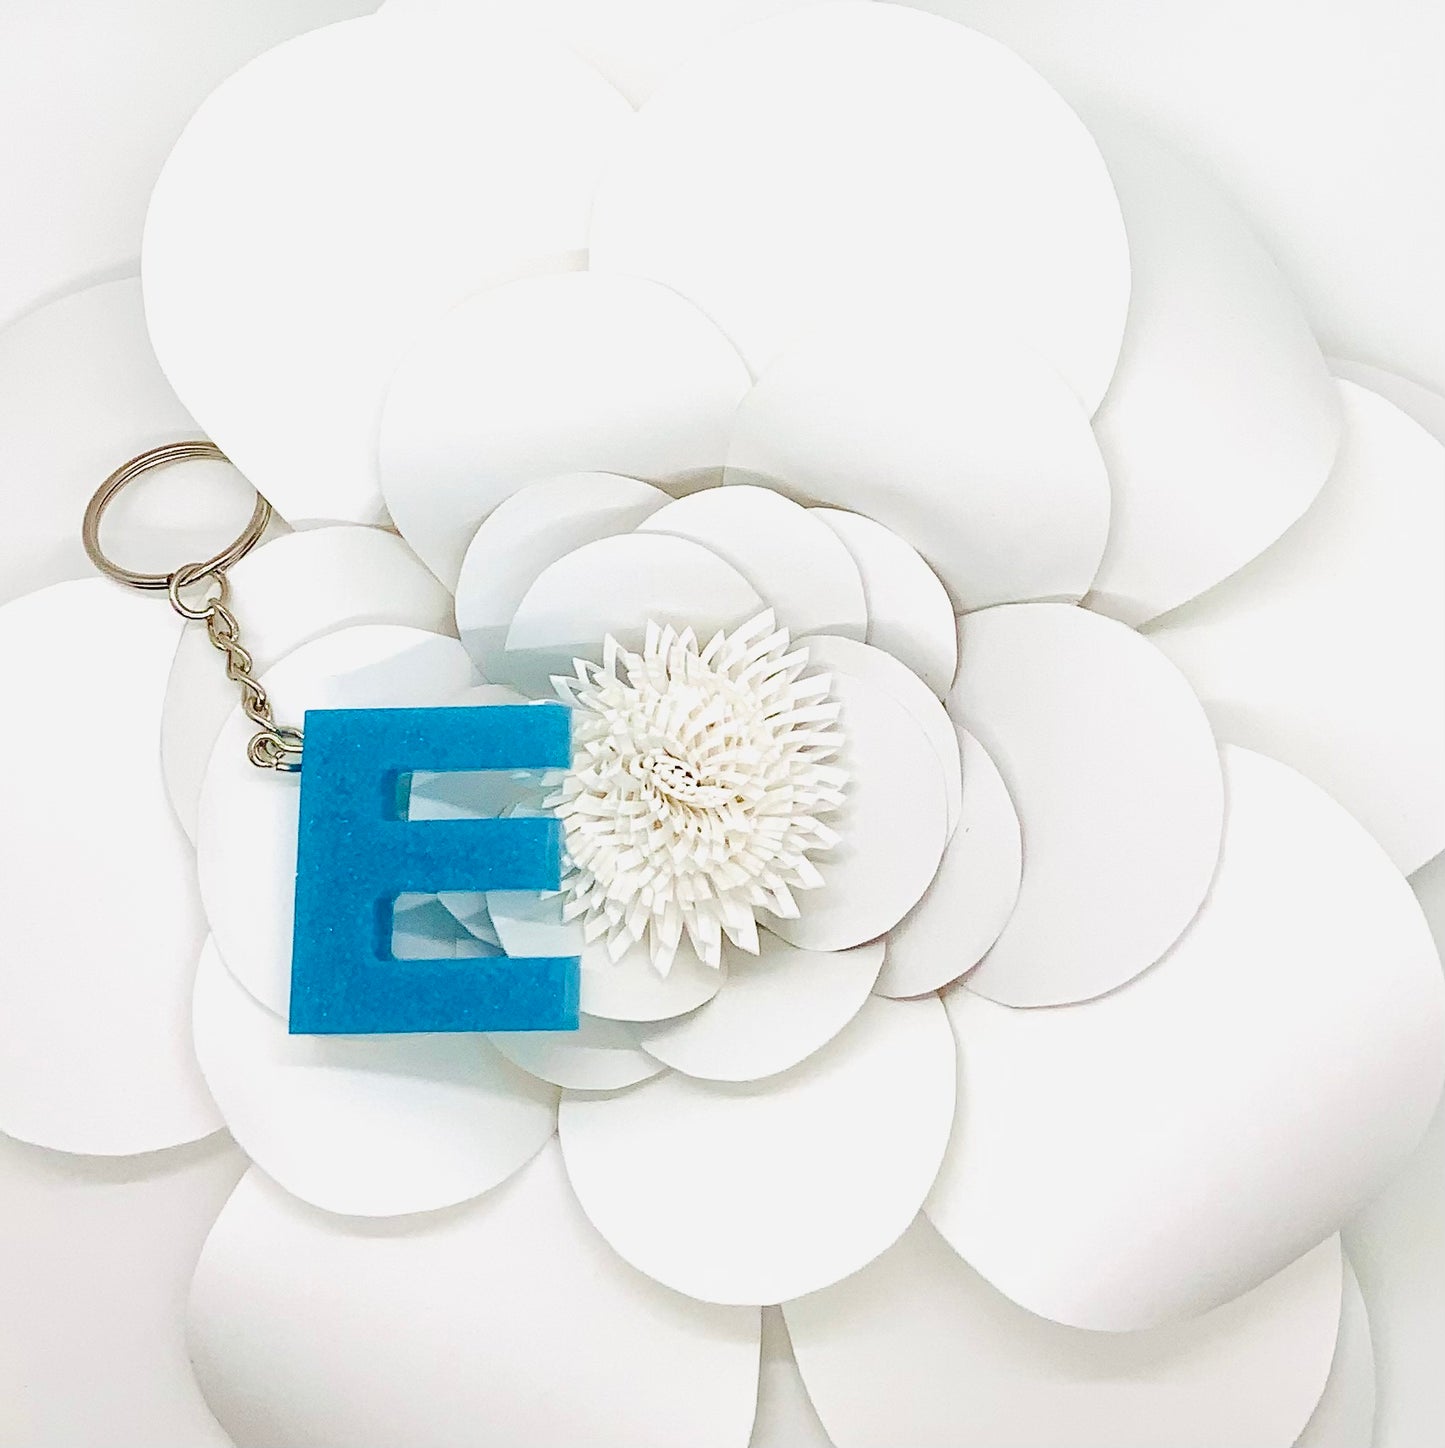 The Letter "E" Keychain